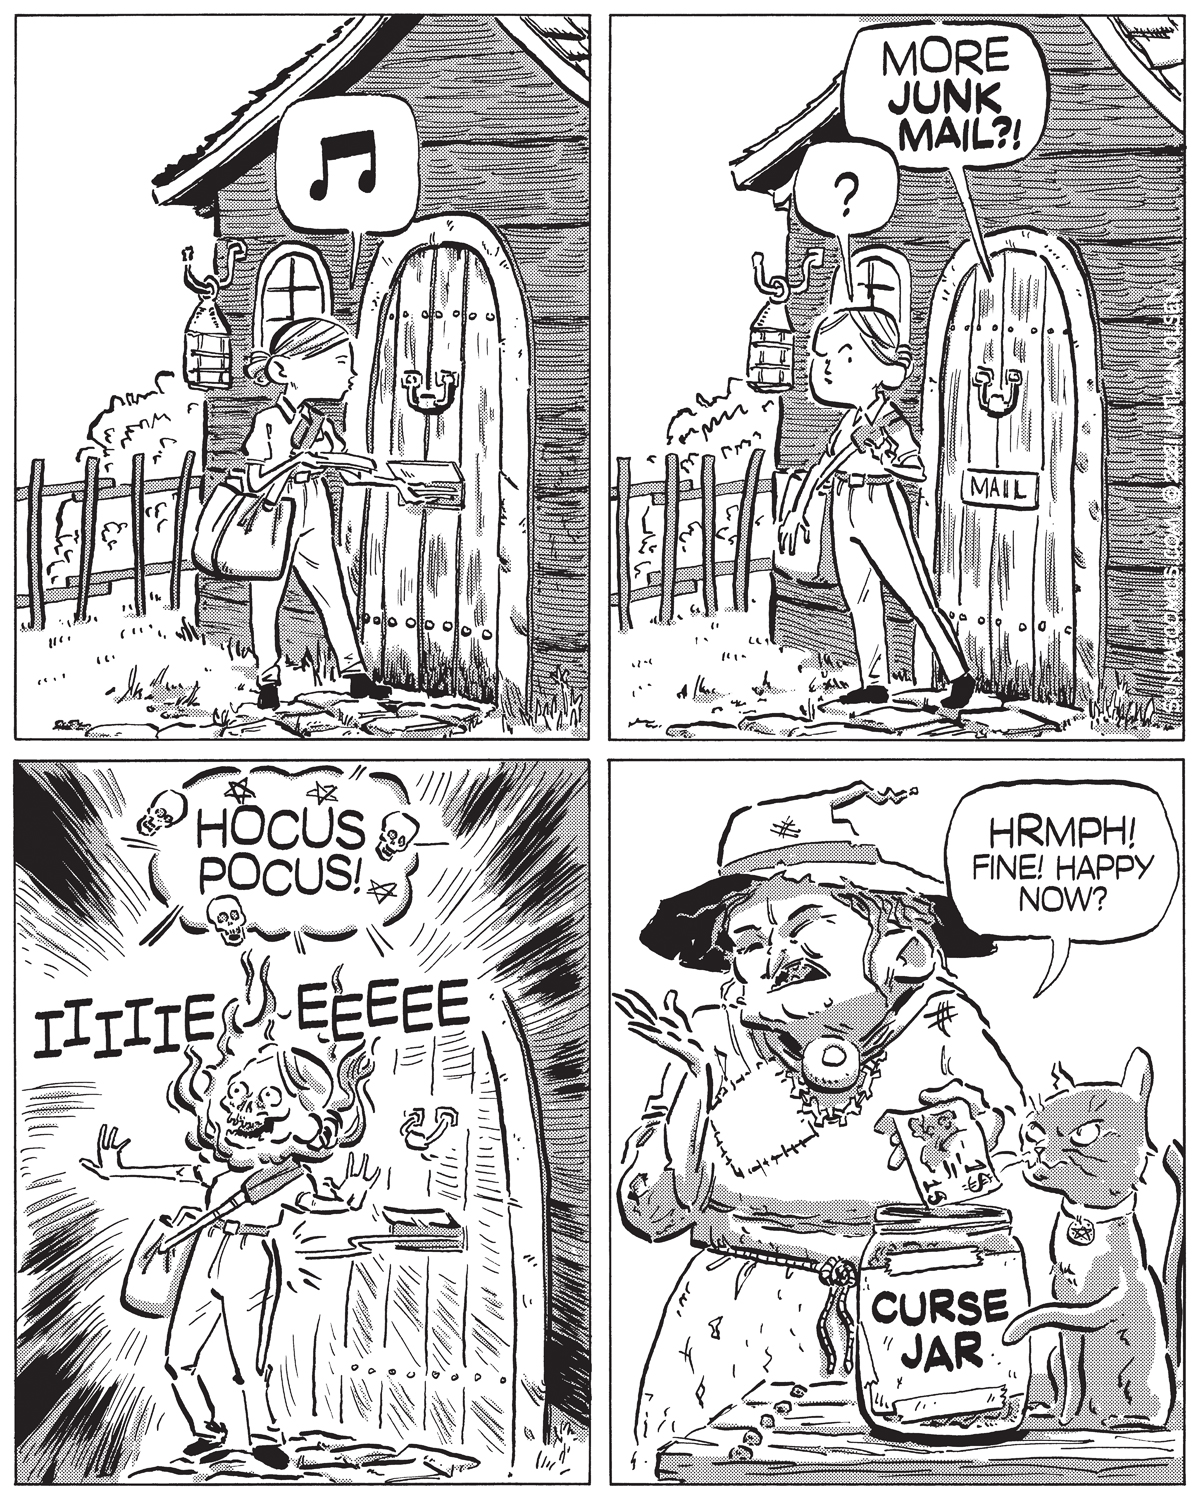 A webcomic that highlights the dangers of delivering mail to a witch. It features a cute cat.